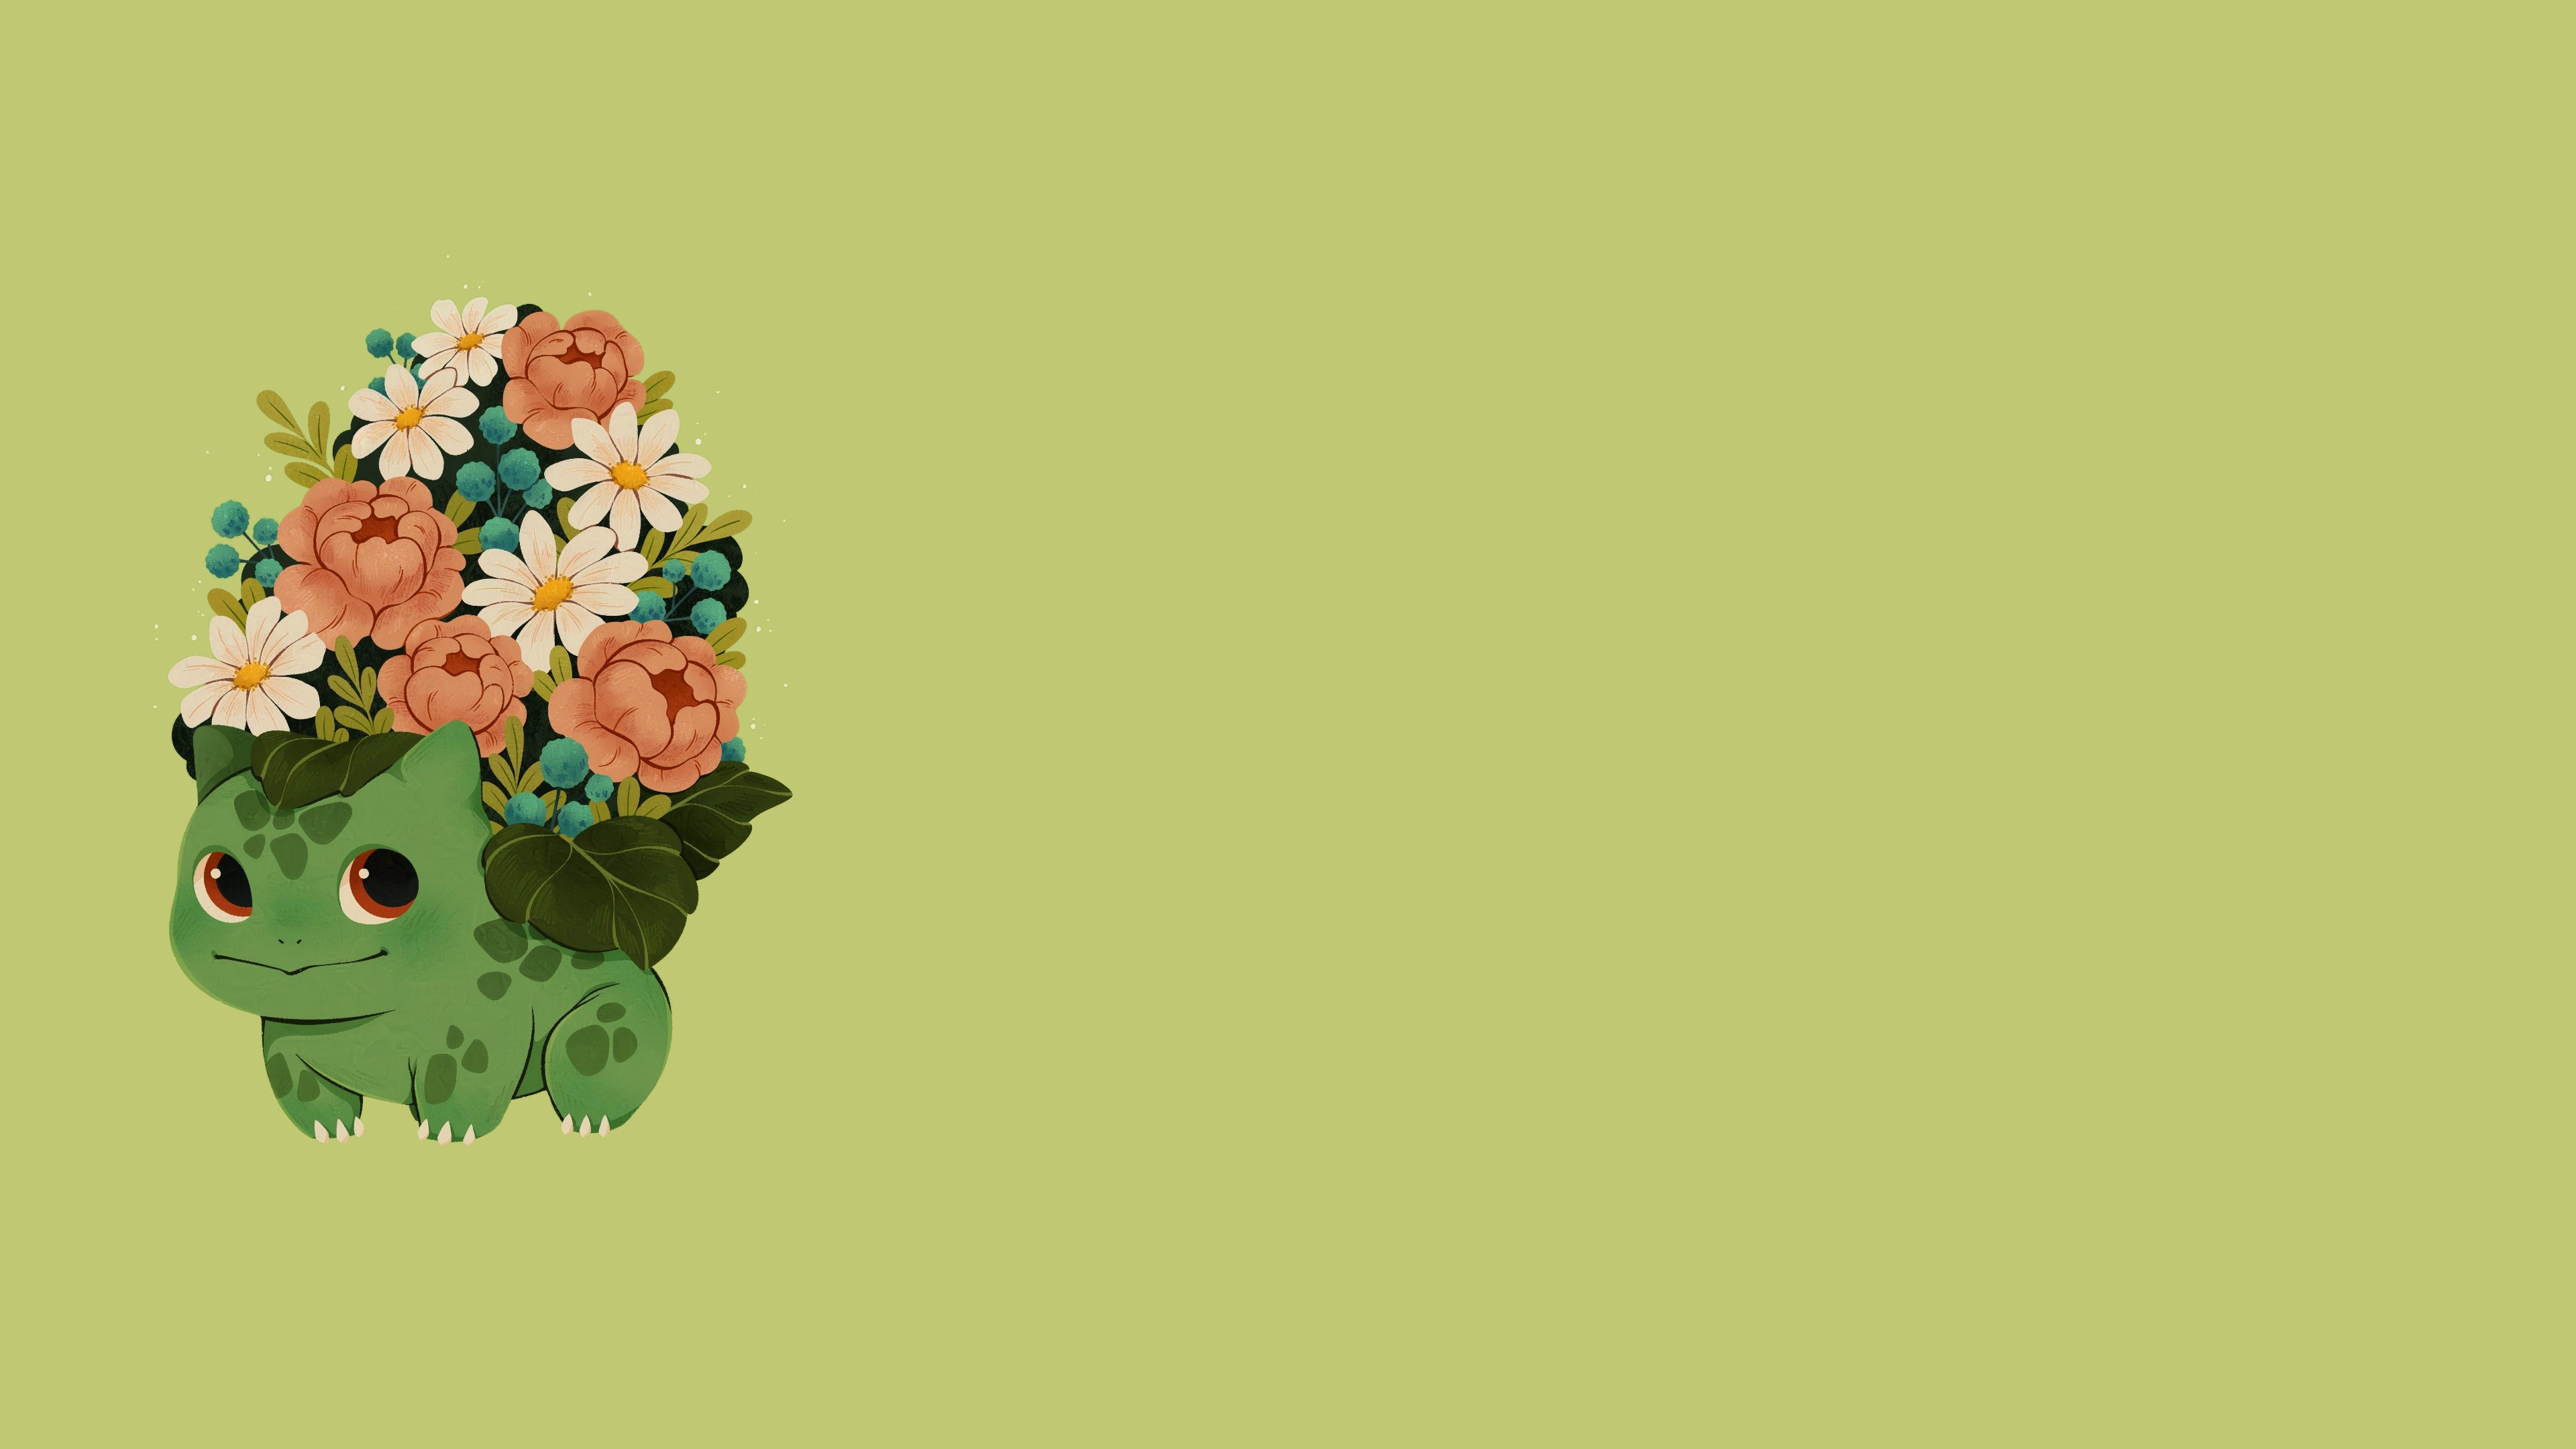 Anime 3840x2160 Bulbasaur Pokémon Pokemon First Generation pastel flowers bouquet bouquets dinosaurs reptiles leaves simple background green background anime video games Nintendo red eyes minimalism